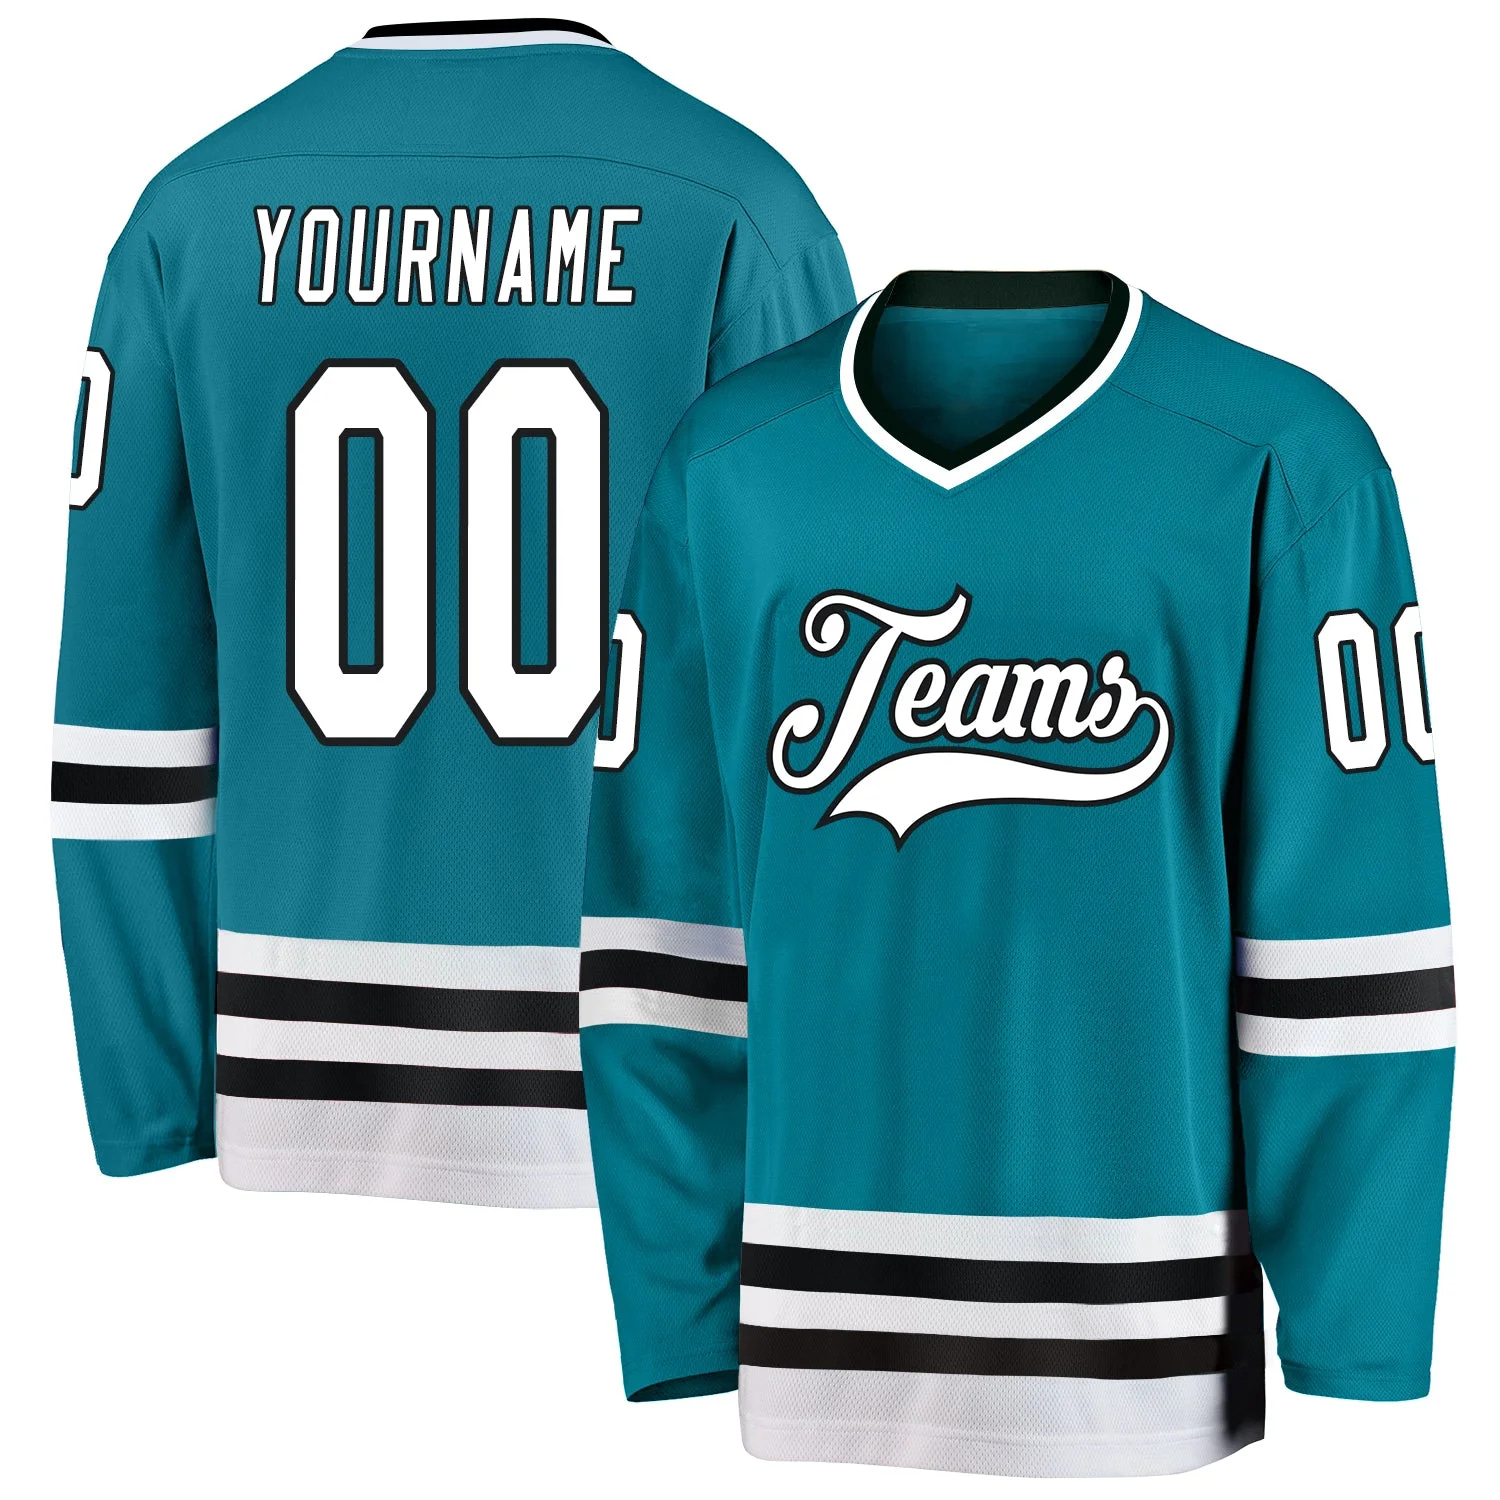 Stitched And Print Teal White-black Hockey Jersey Custom